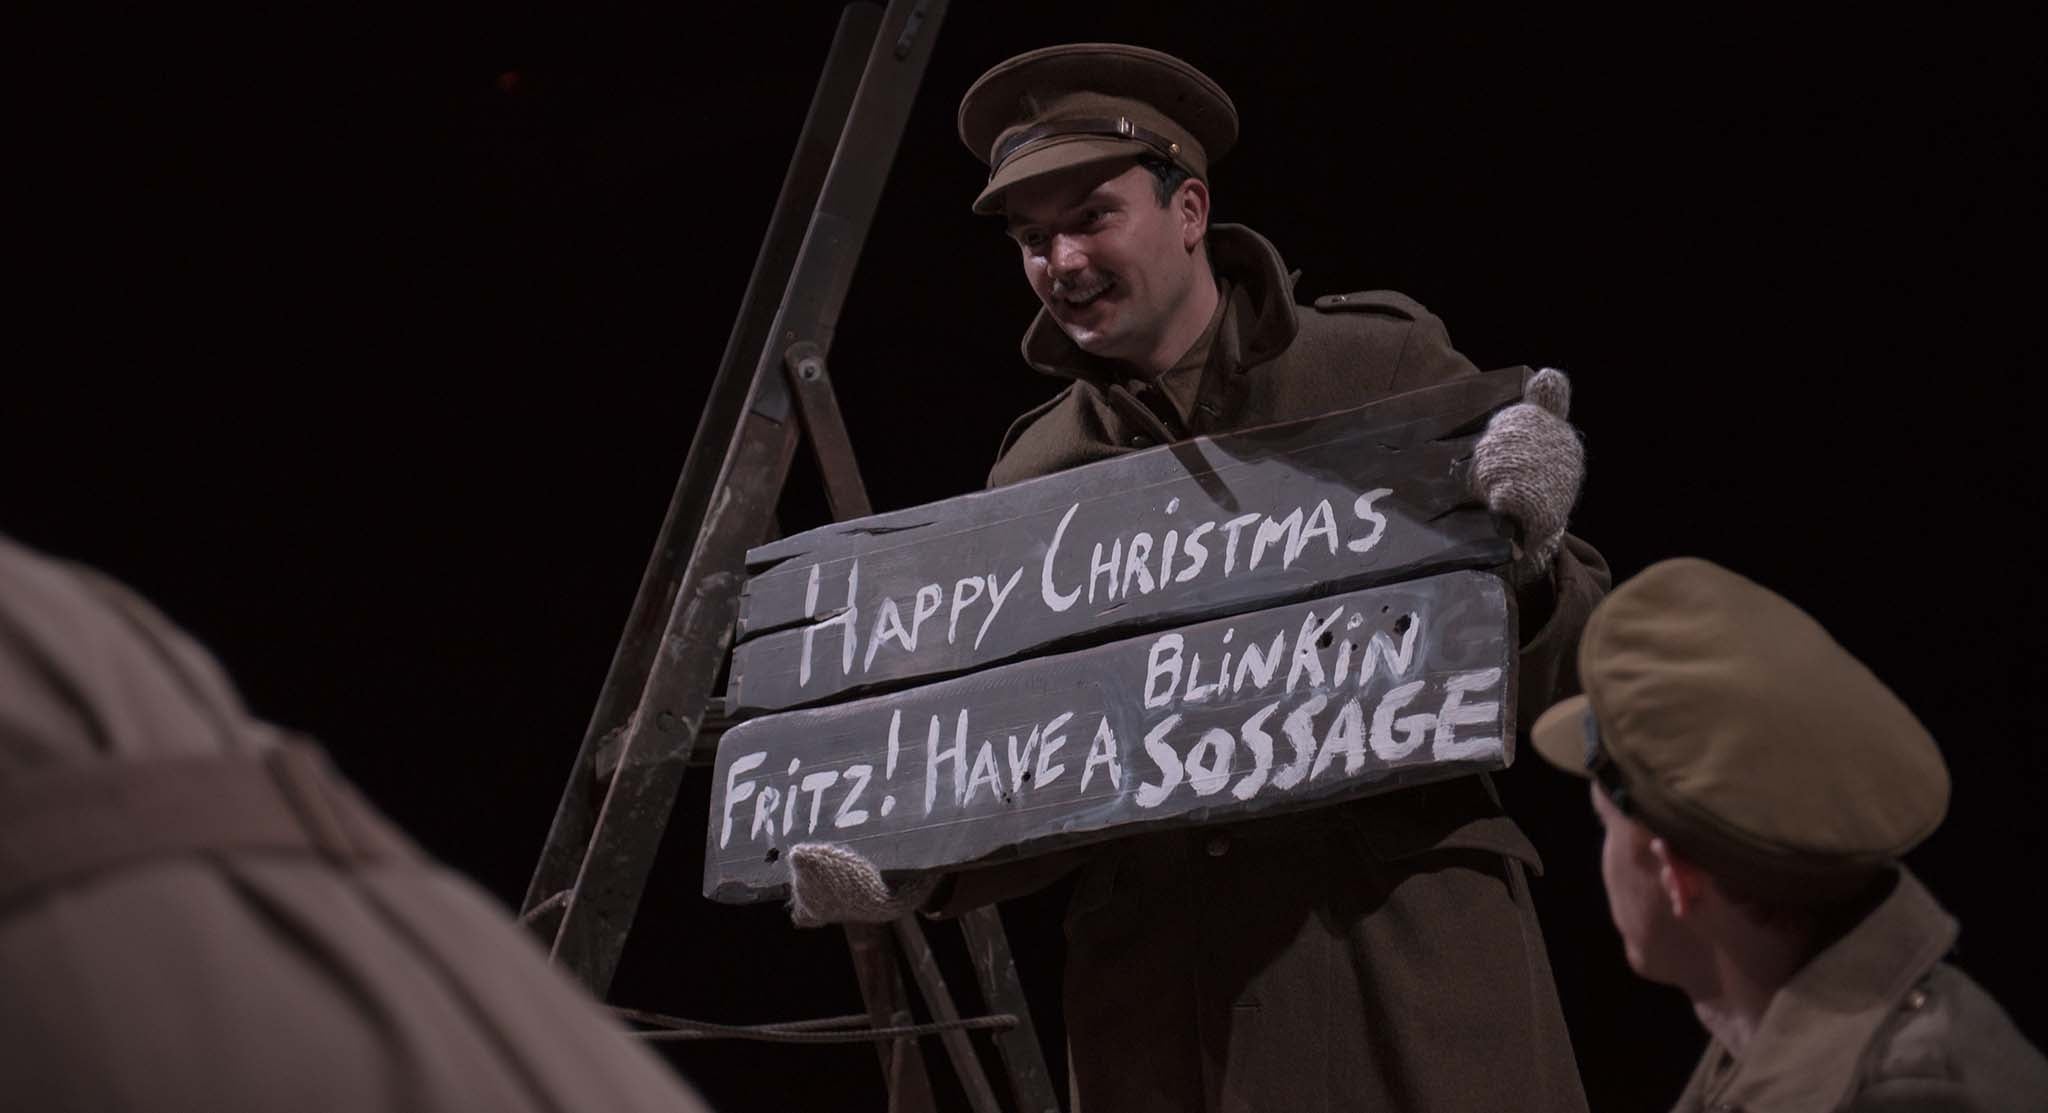 William Belchambers (Alf) in The Christmas Truce